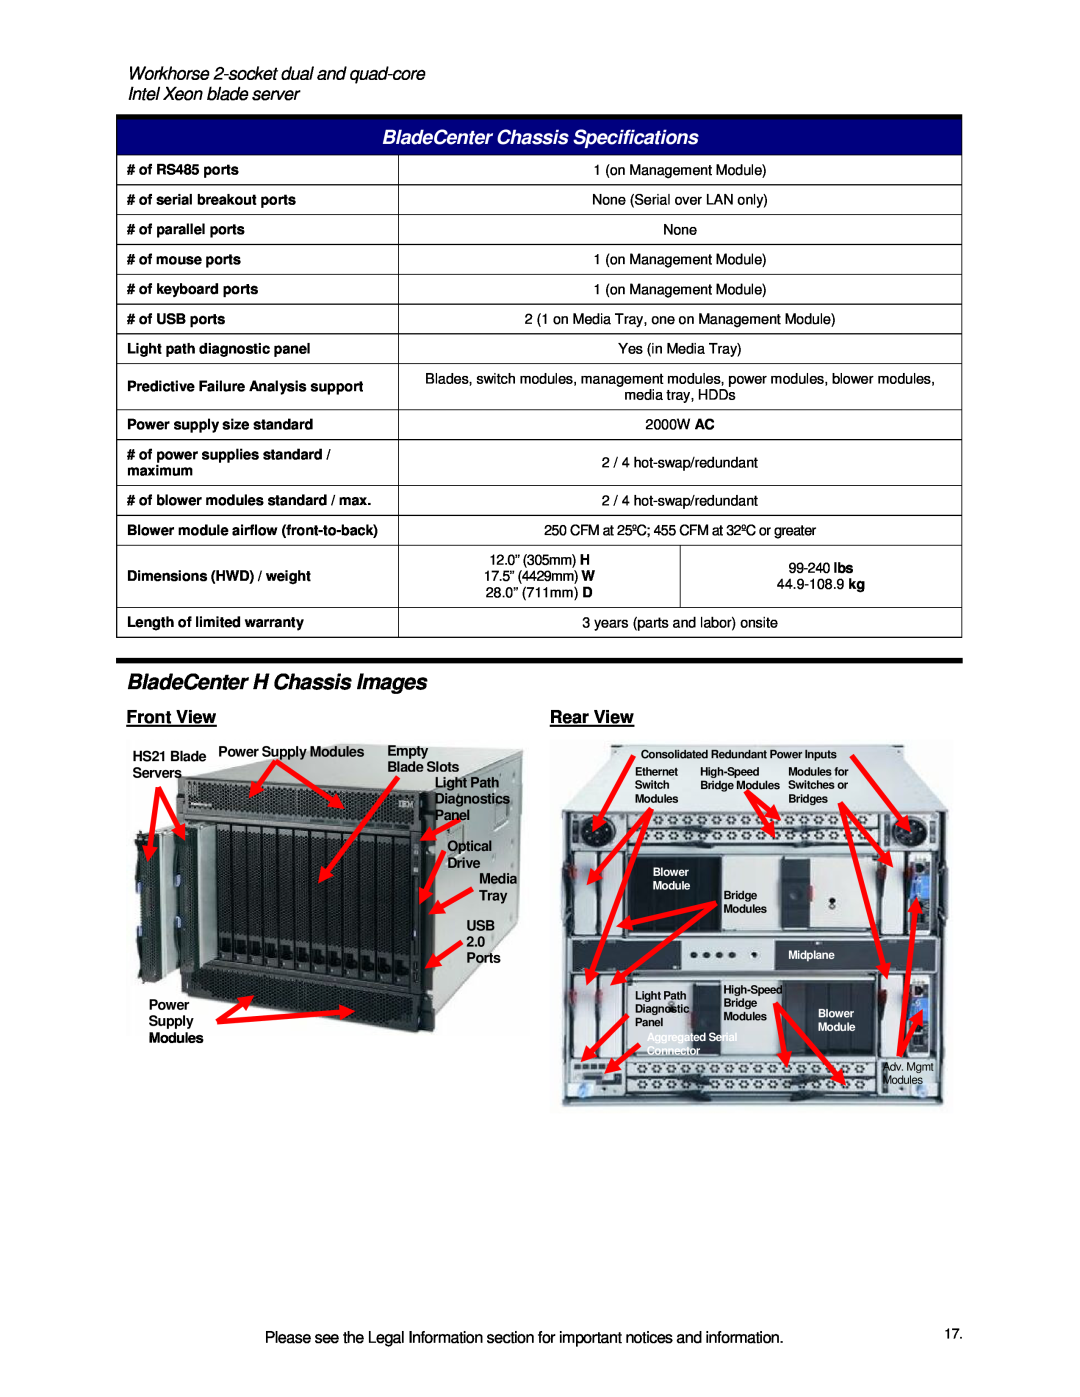 IBM HS21 specifications BladeCenter H Chassis Images, Rear View, BladeCenter Chassis Specifications, Front View 